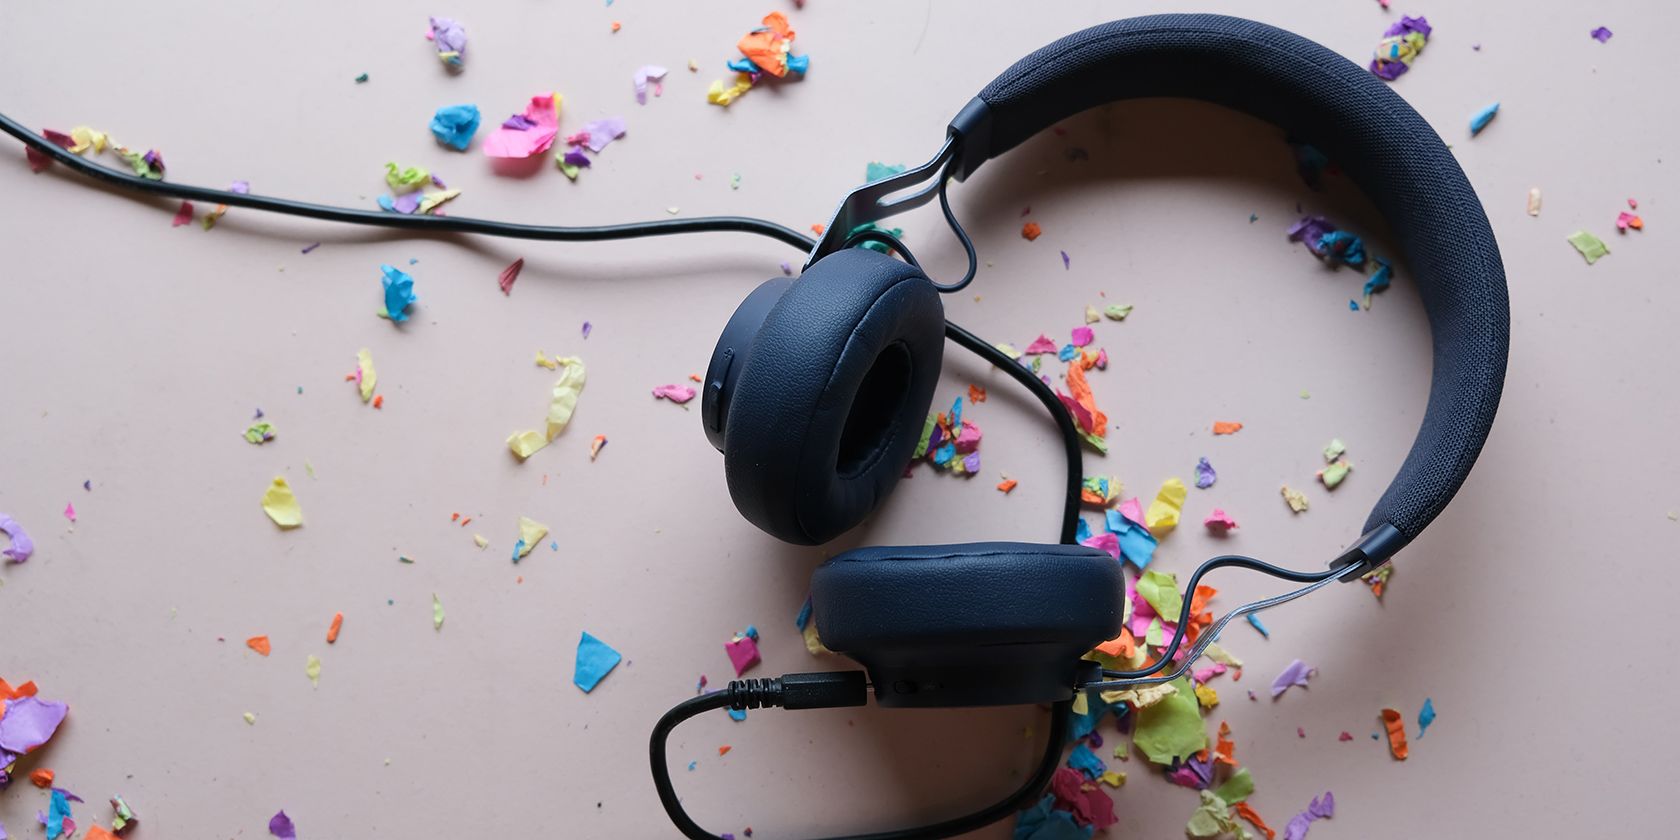 Headphones on a colorful background